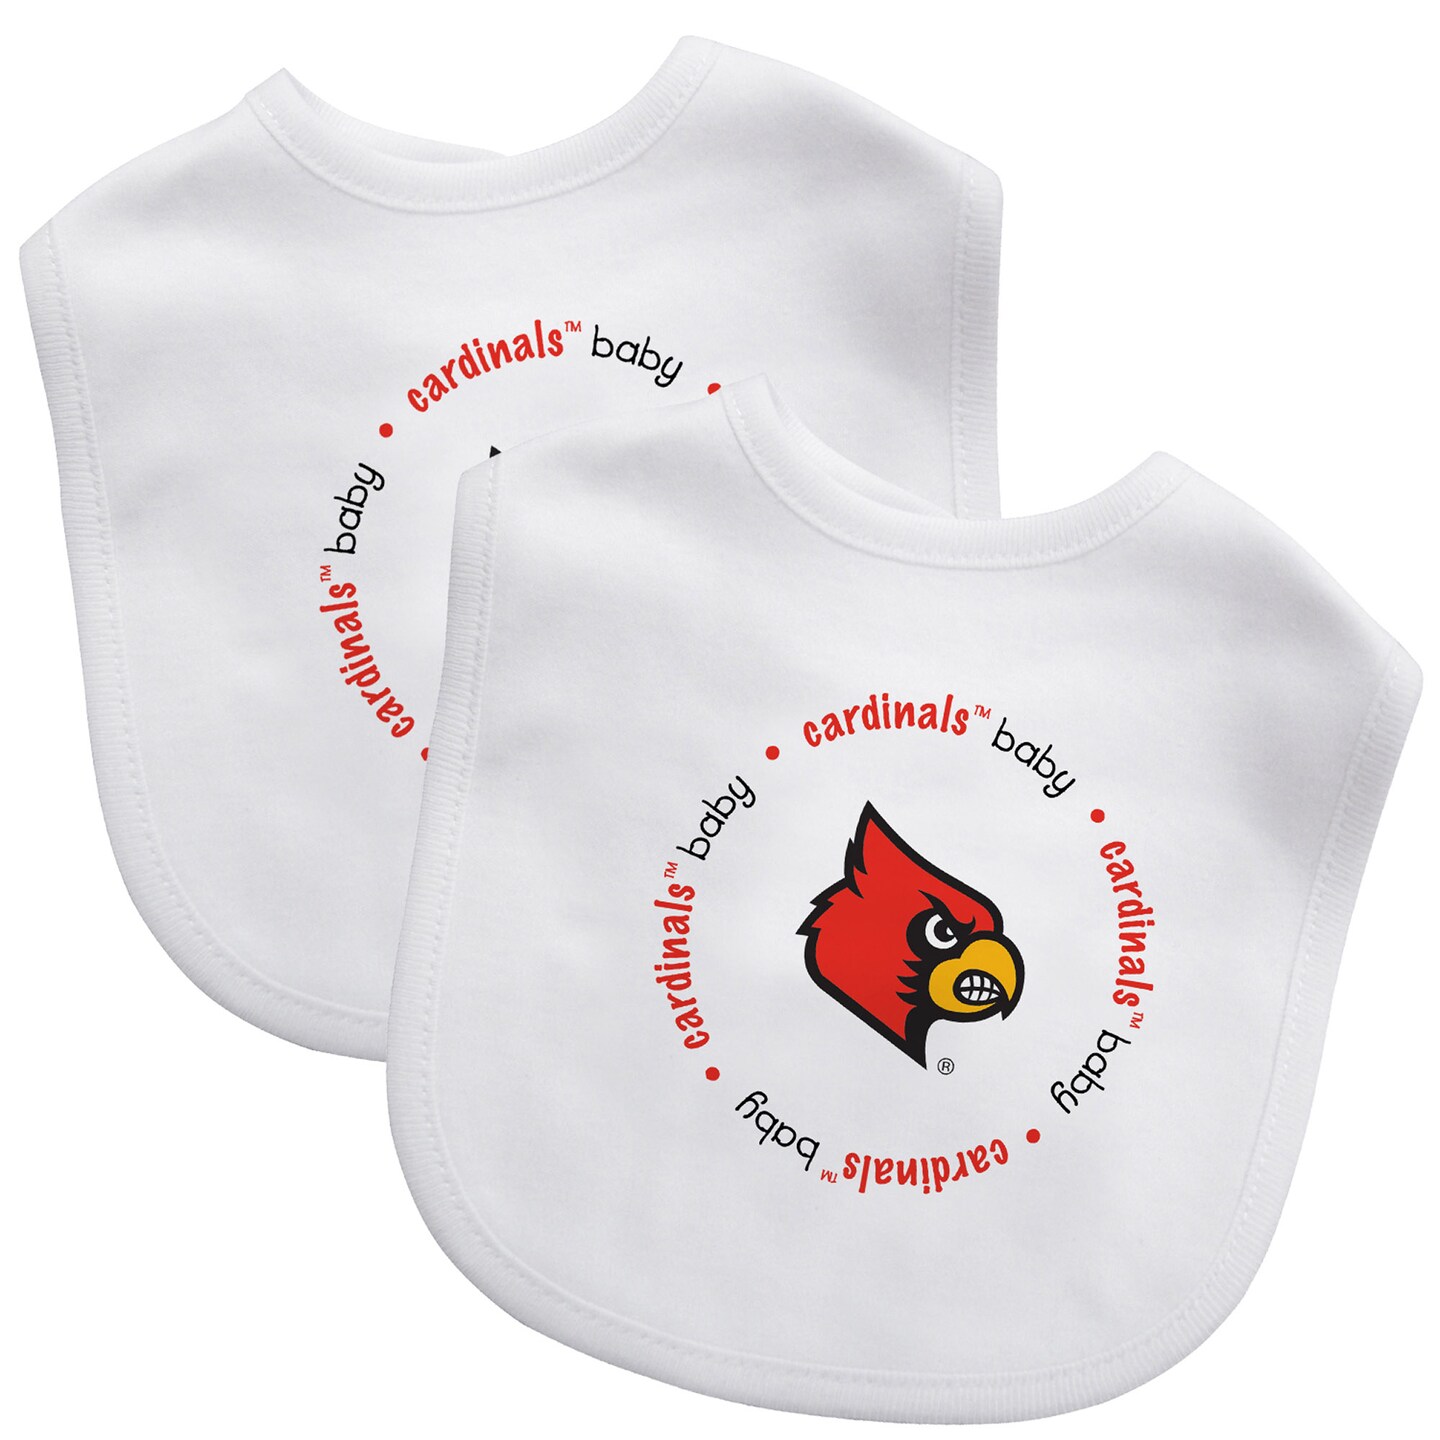 Baby Fanatic Officially Licensed Unisex Baby Bibs 2 Pack - NCAA